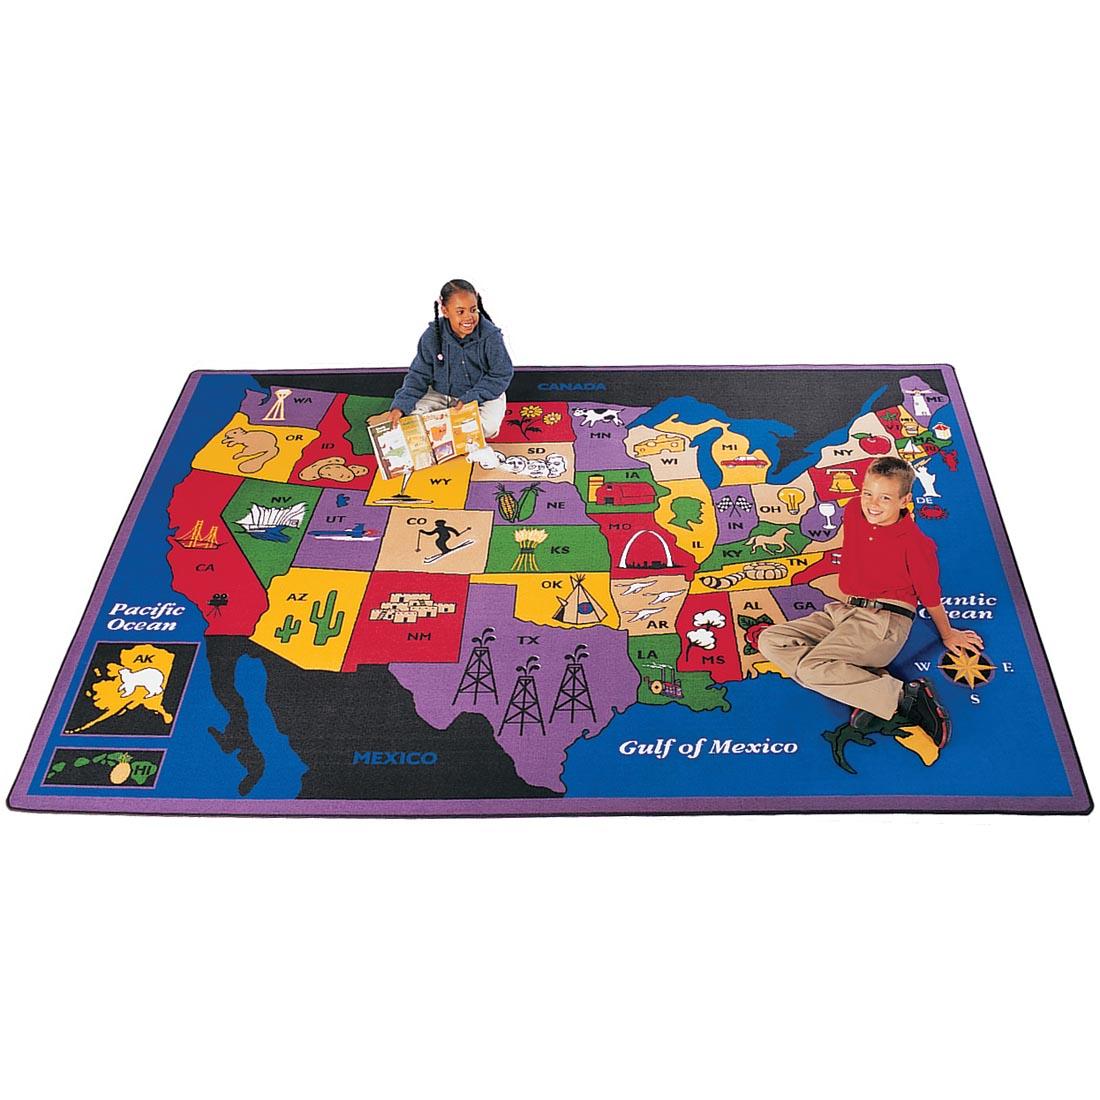 Children sitting on the Discover America Rug by Carpets For Kids